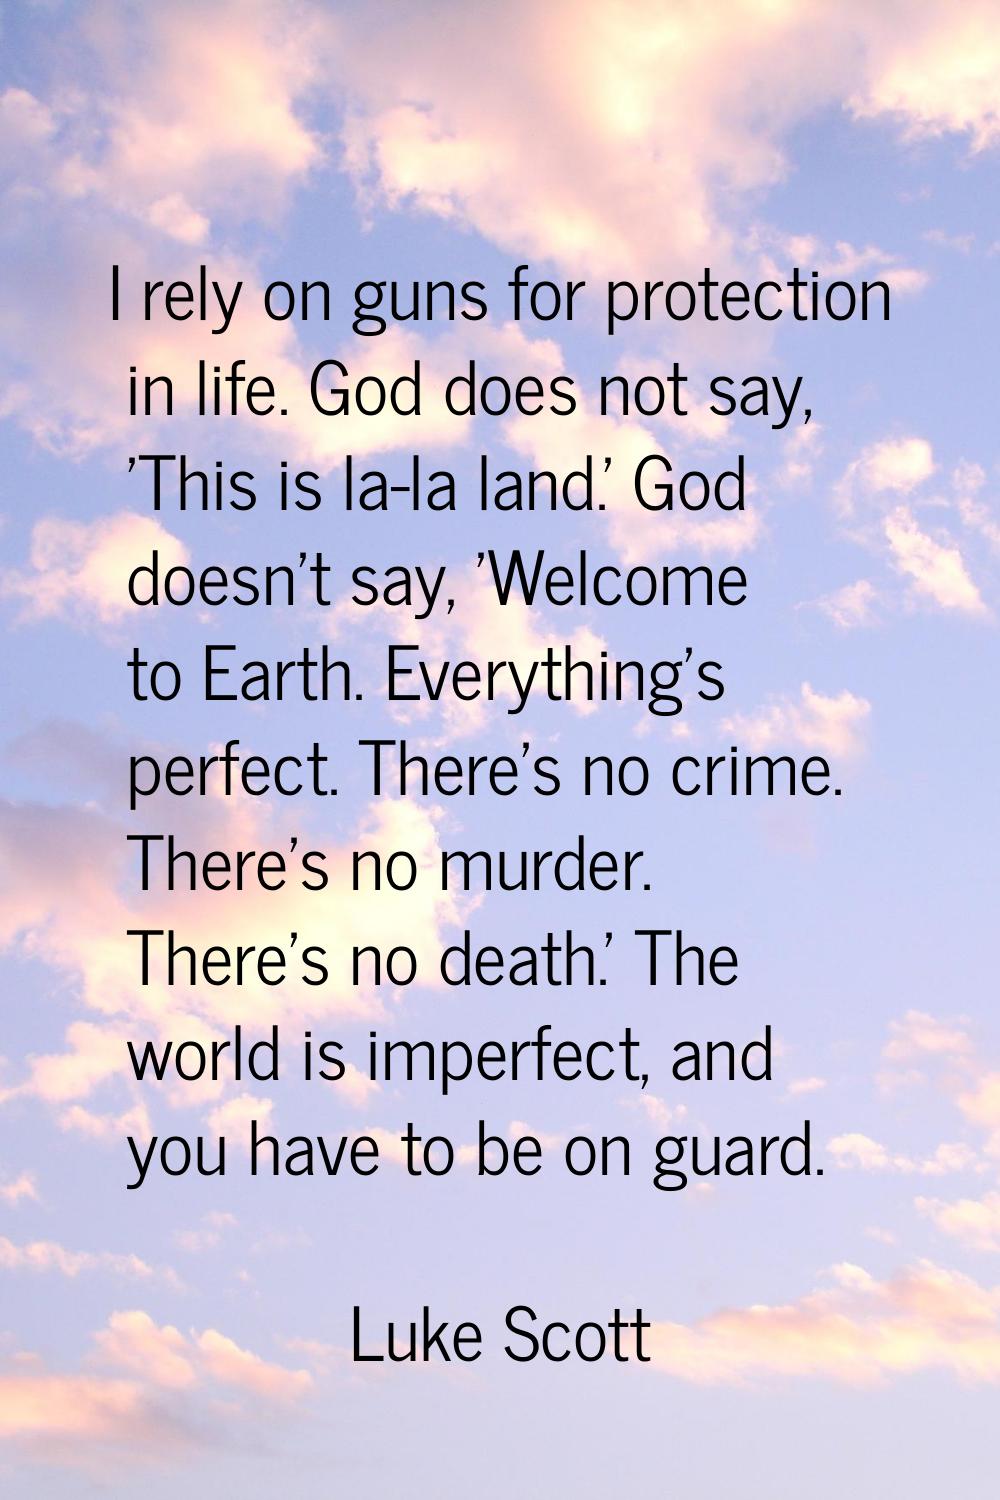 I rely on guns for protection in life. God does not say, 'This is la-la land.' God doesn't say, 'We